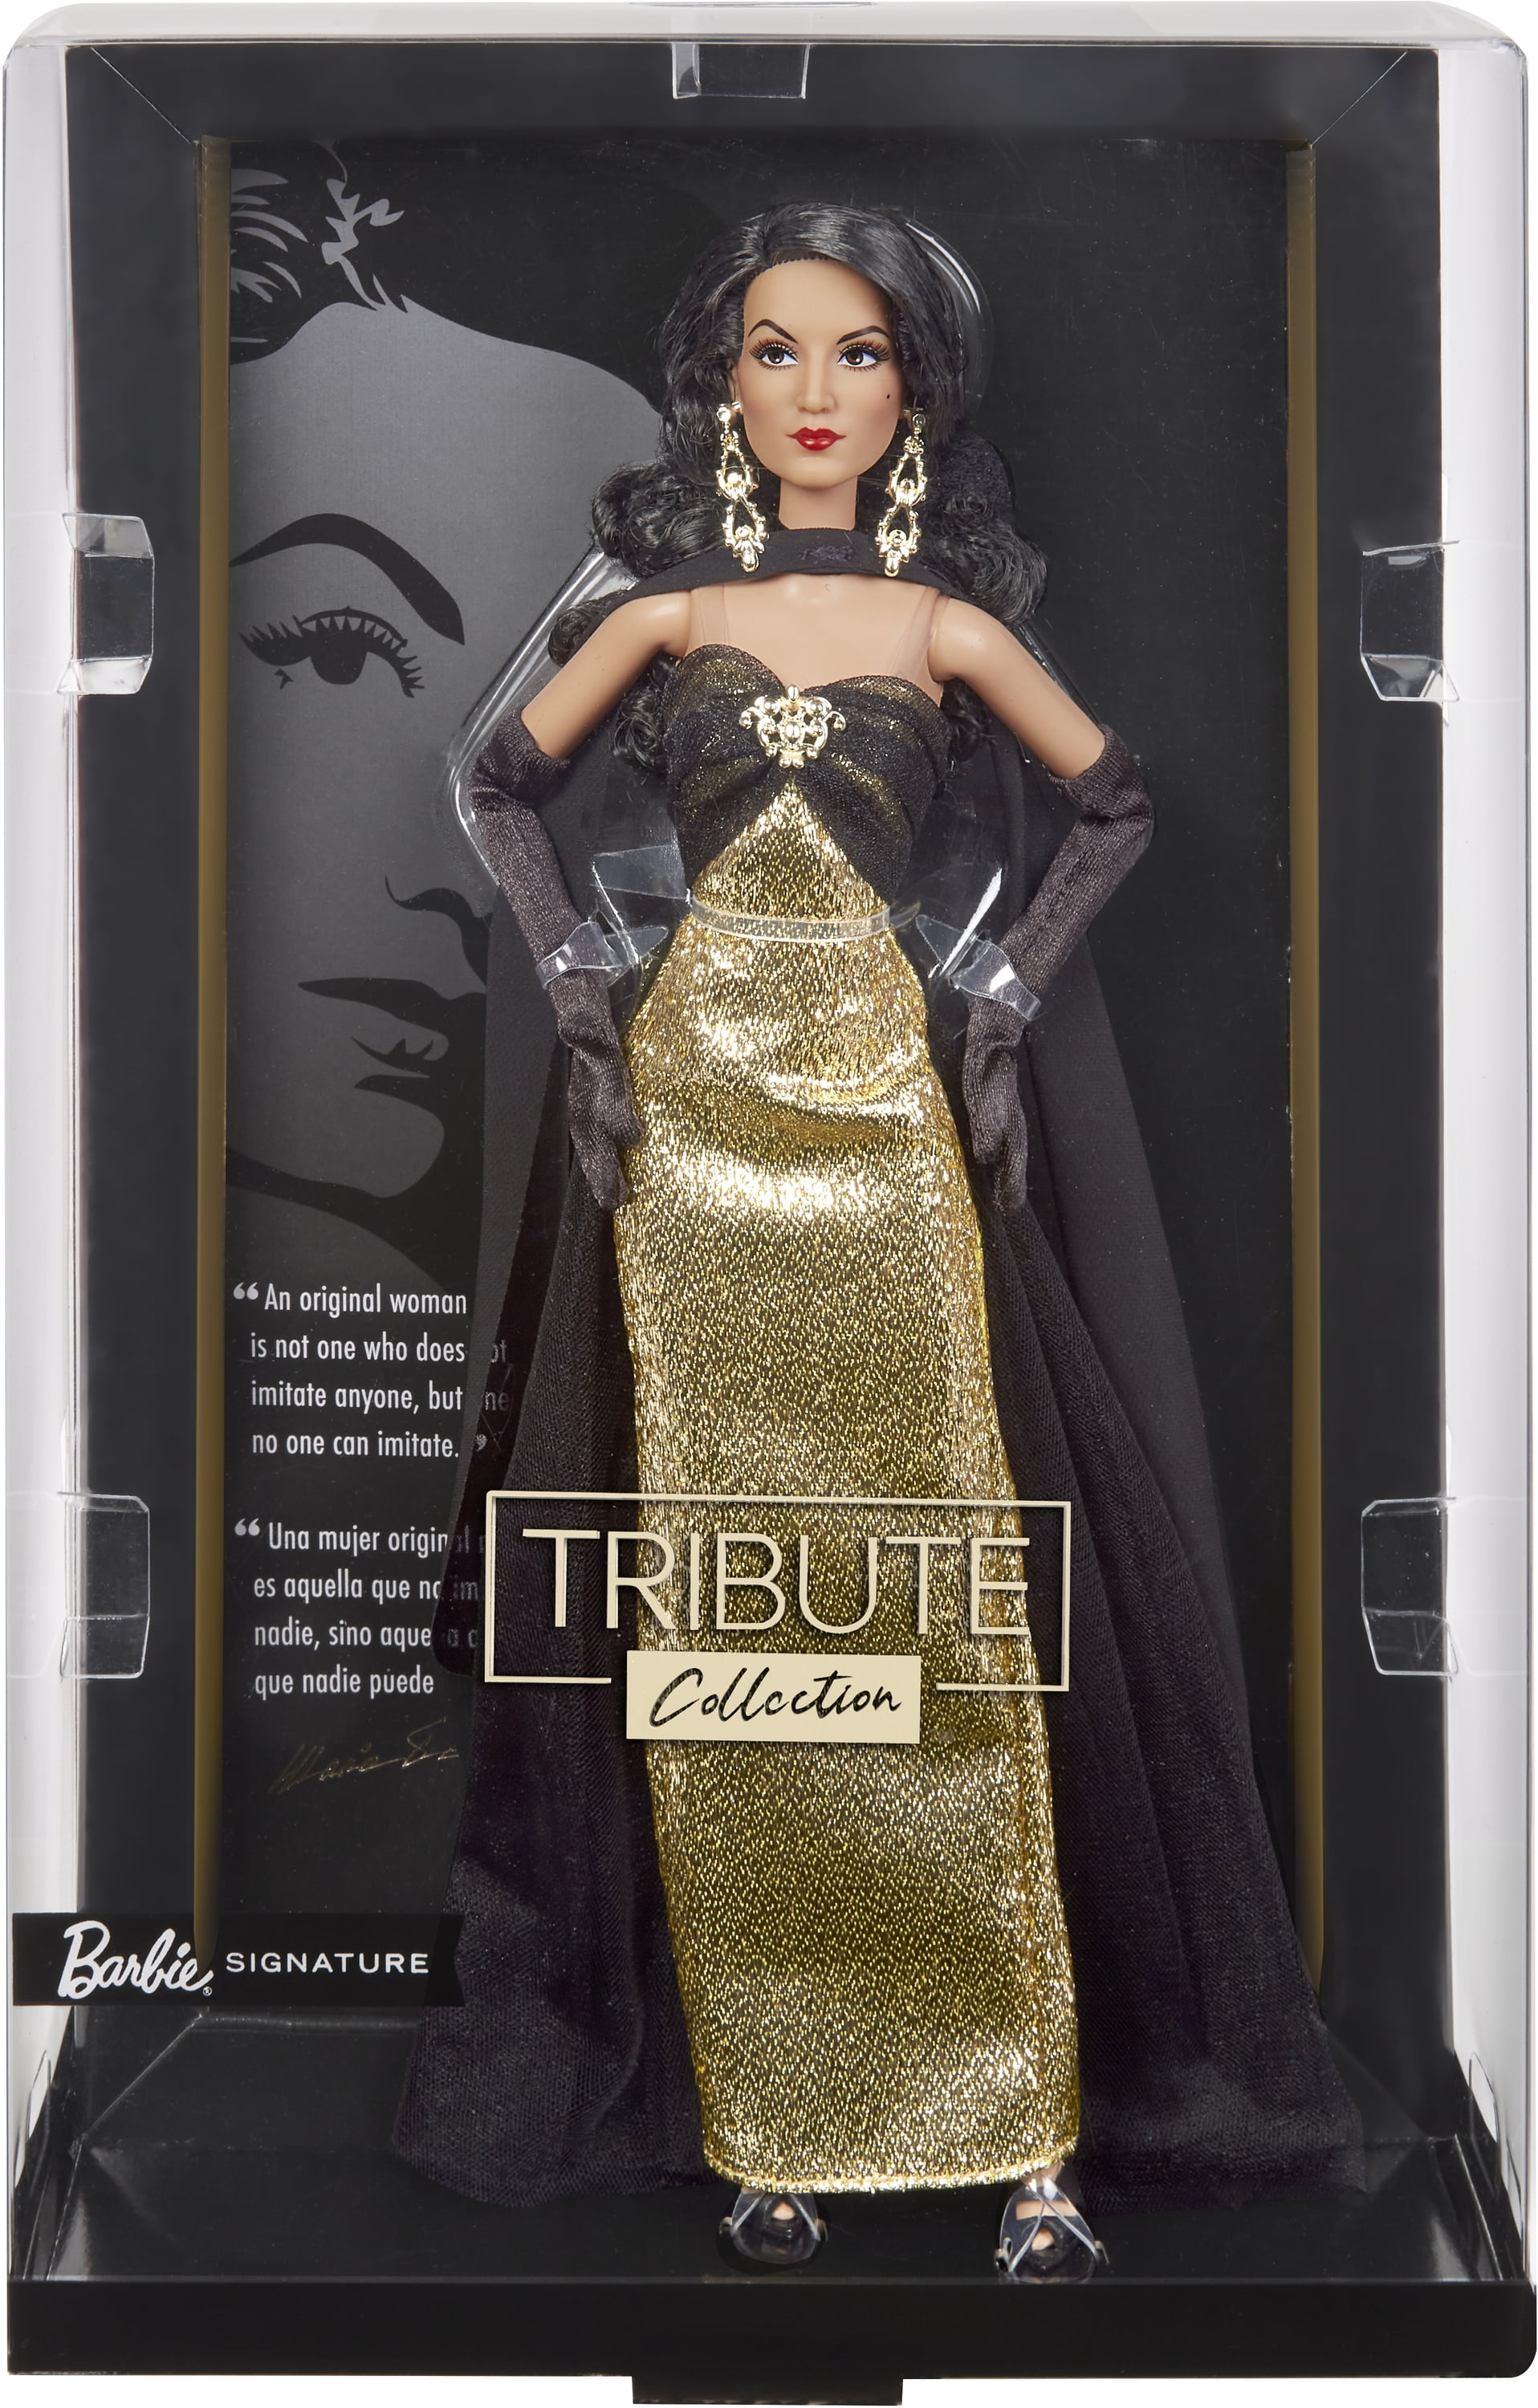 Collector Barbie Doll, María Félix in Glimmering Gold Gown, Barbie  Signature 